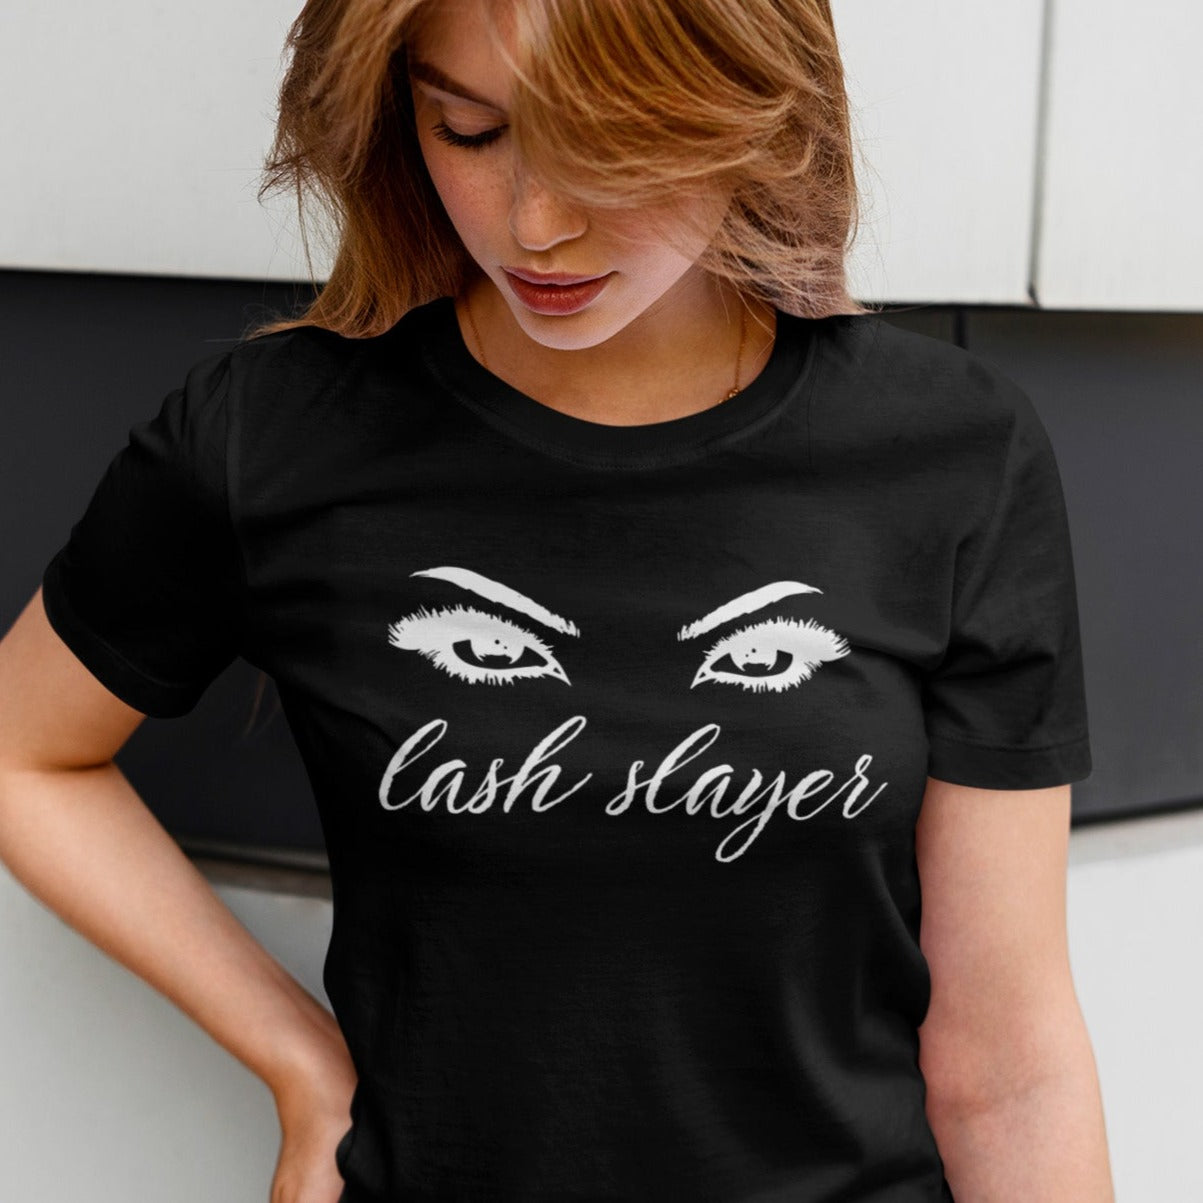 lash-slayer-black-t-shirt-womens-fashion-mockup-of-a-blonde-woman-checking-out-her-tee